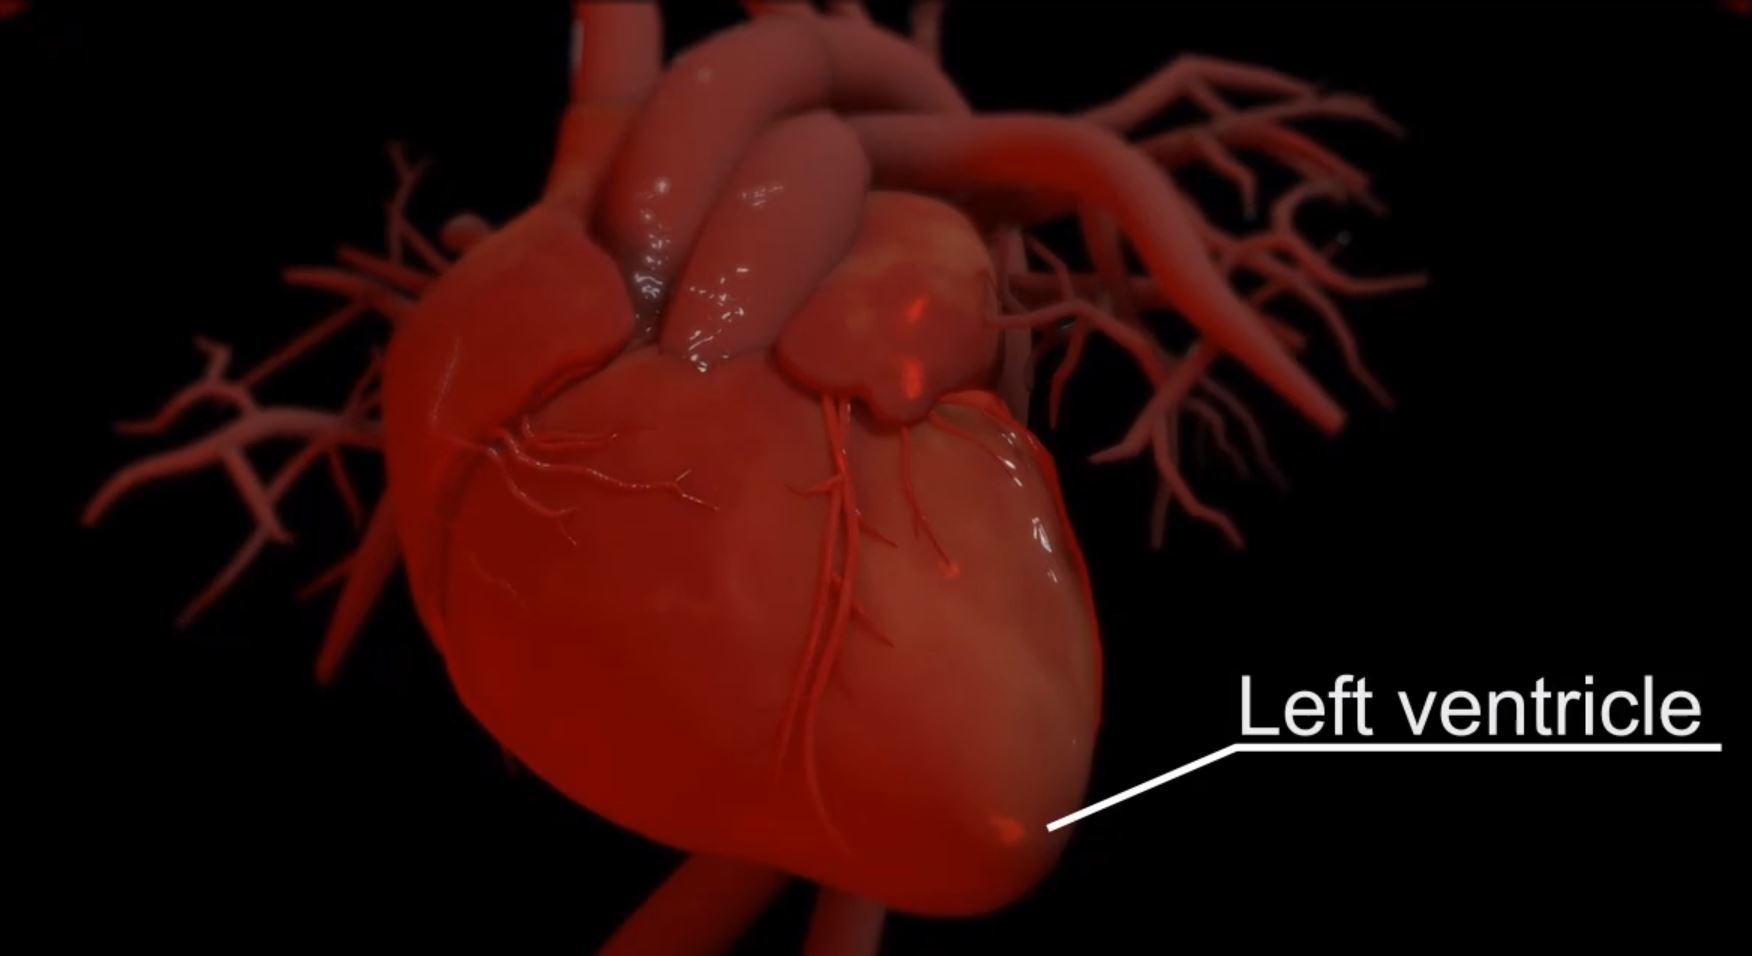 A 3D animation describing the human heart's parts and functioning.